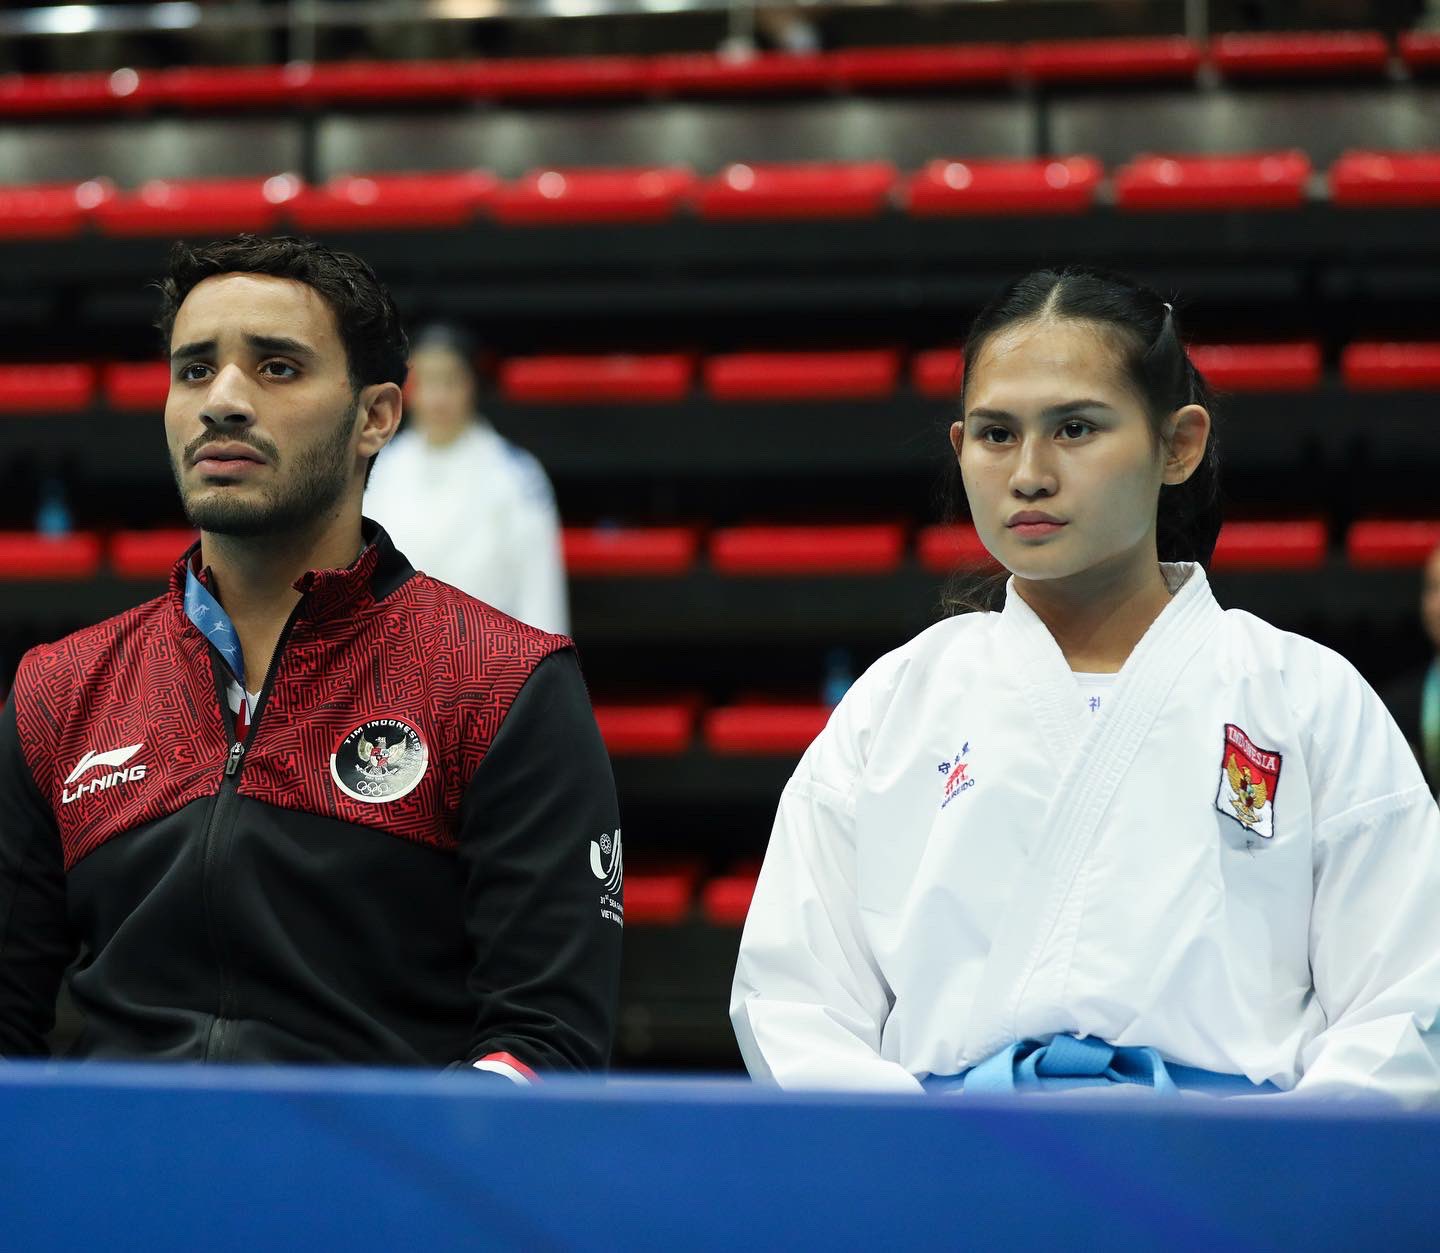 Farouk Abdesselem approached for The Olympic Qualification Tournament